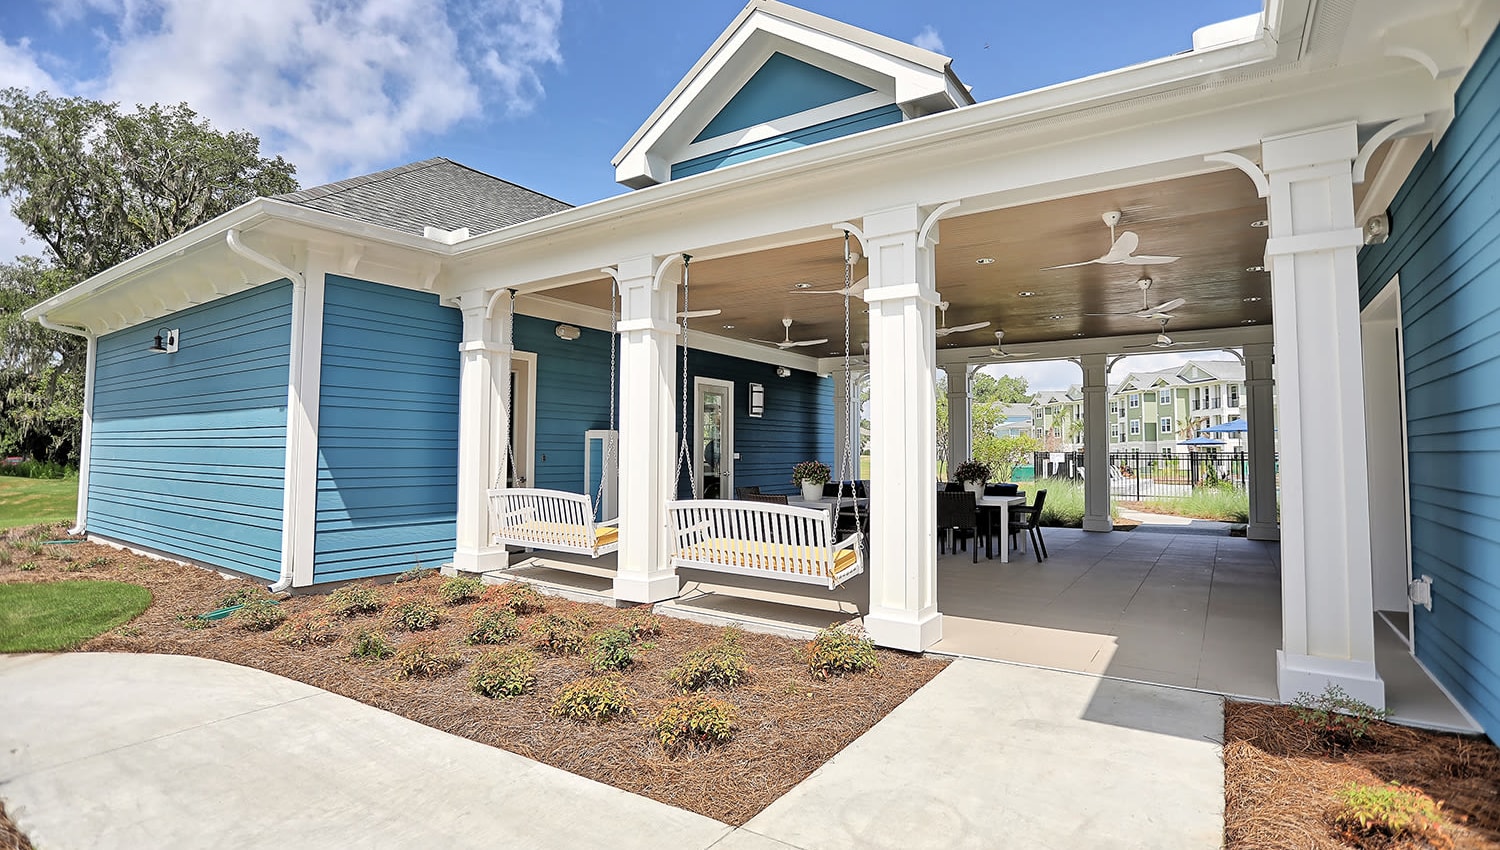 Professionally maintained landscaping throughout our community at The Slate in Savannah, Georgia